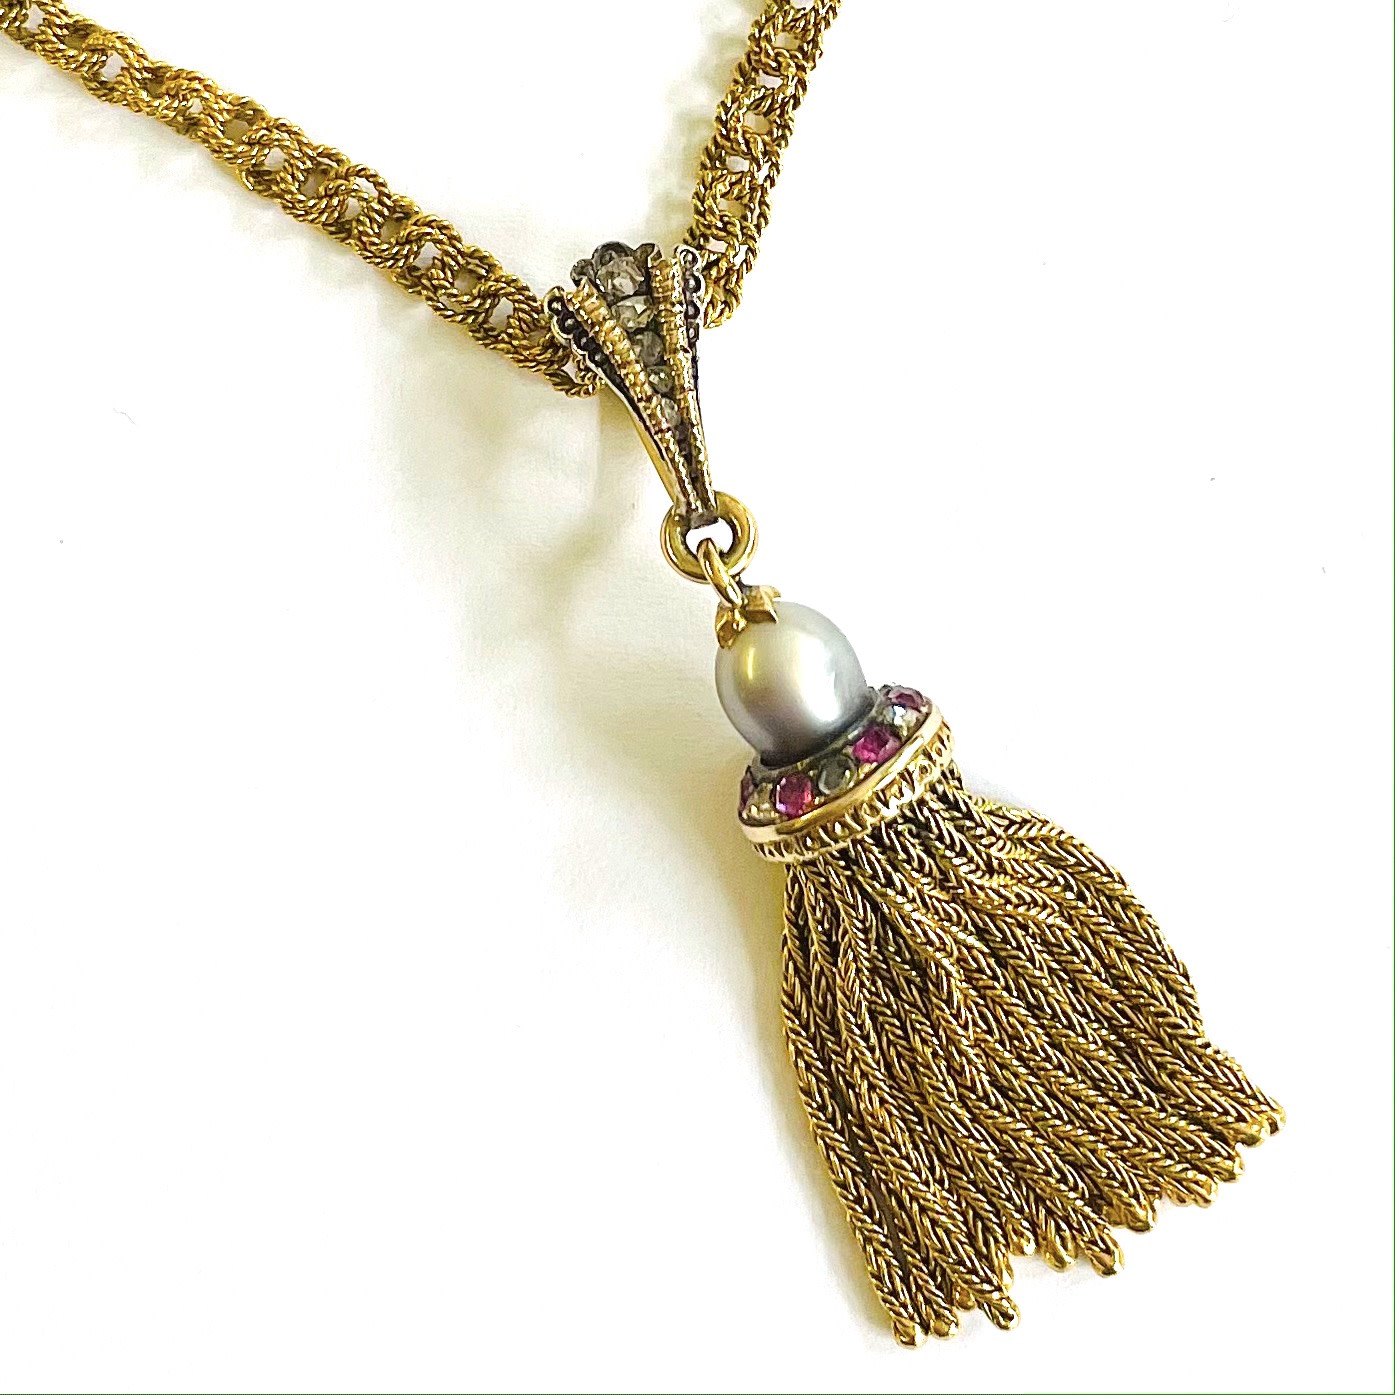 French Antique 18KT Yellow Gold Natural Pearl, Diamond & Ruby Tassel Pendant Necklace front of tassel